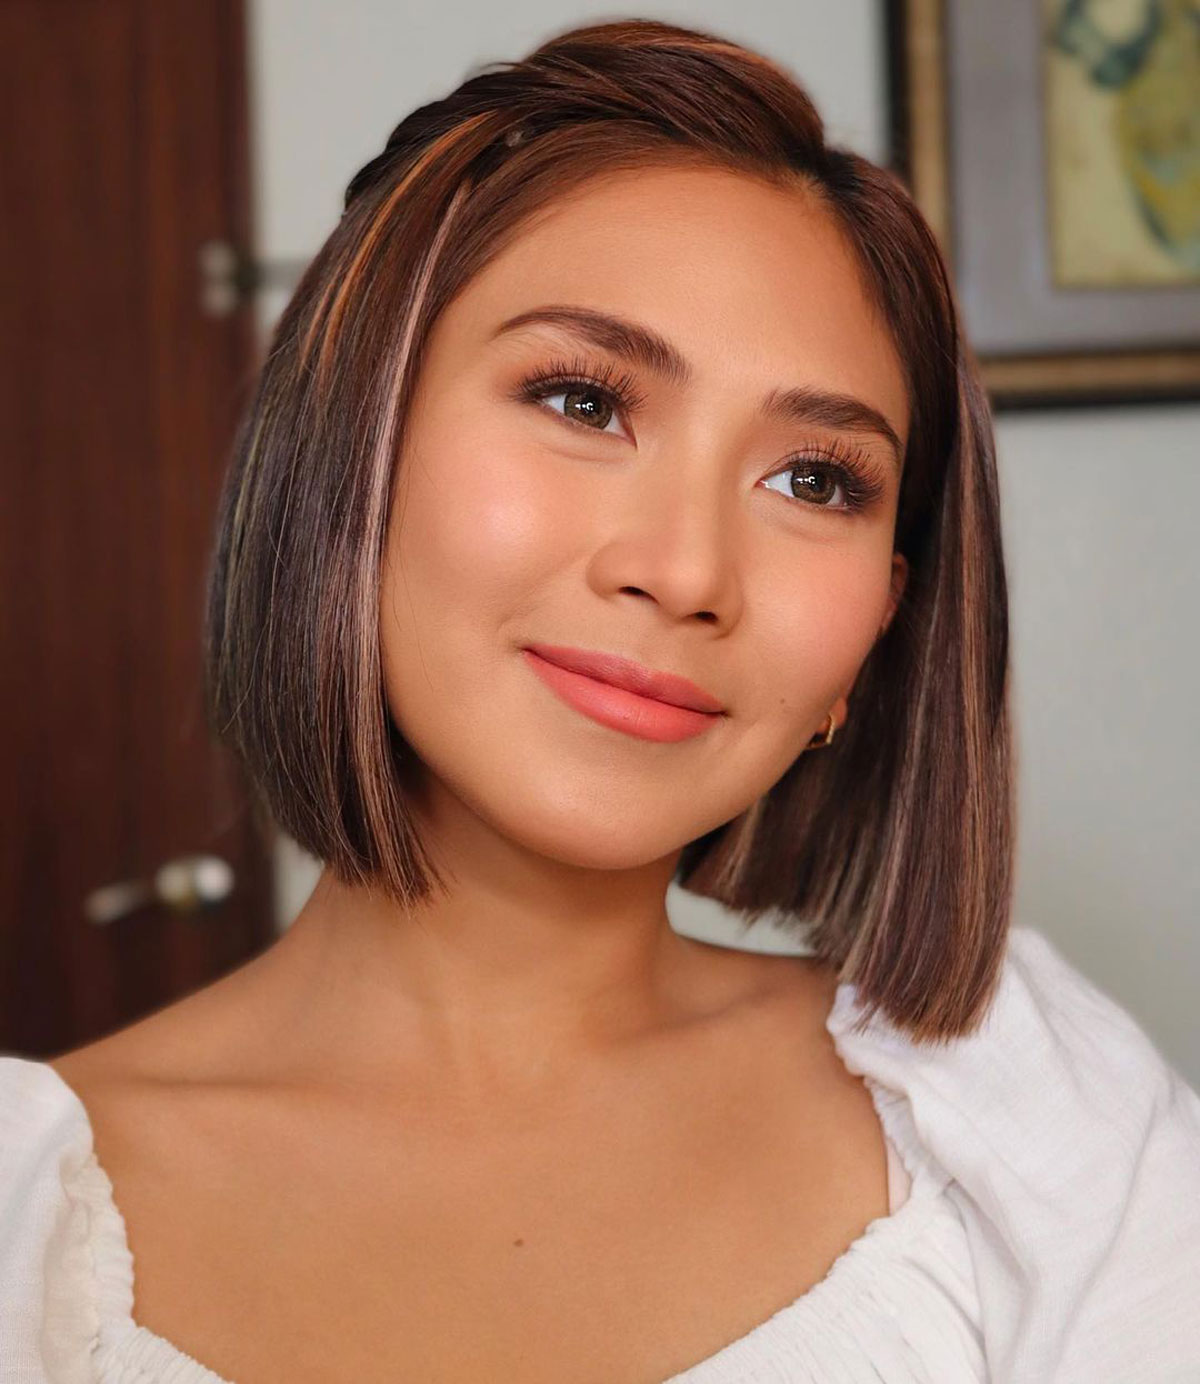 Look: Sarah Geronimo's Short Hair Color With Highlights